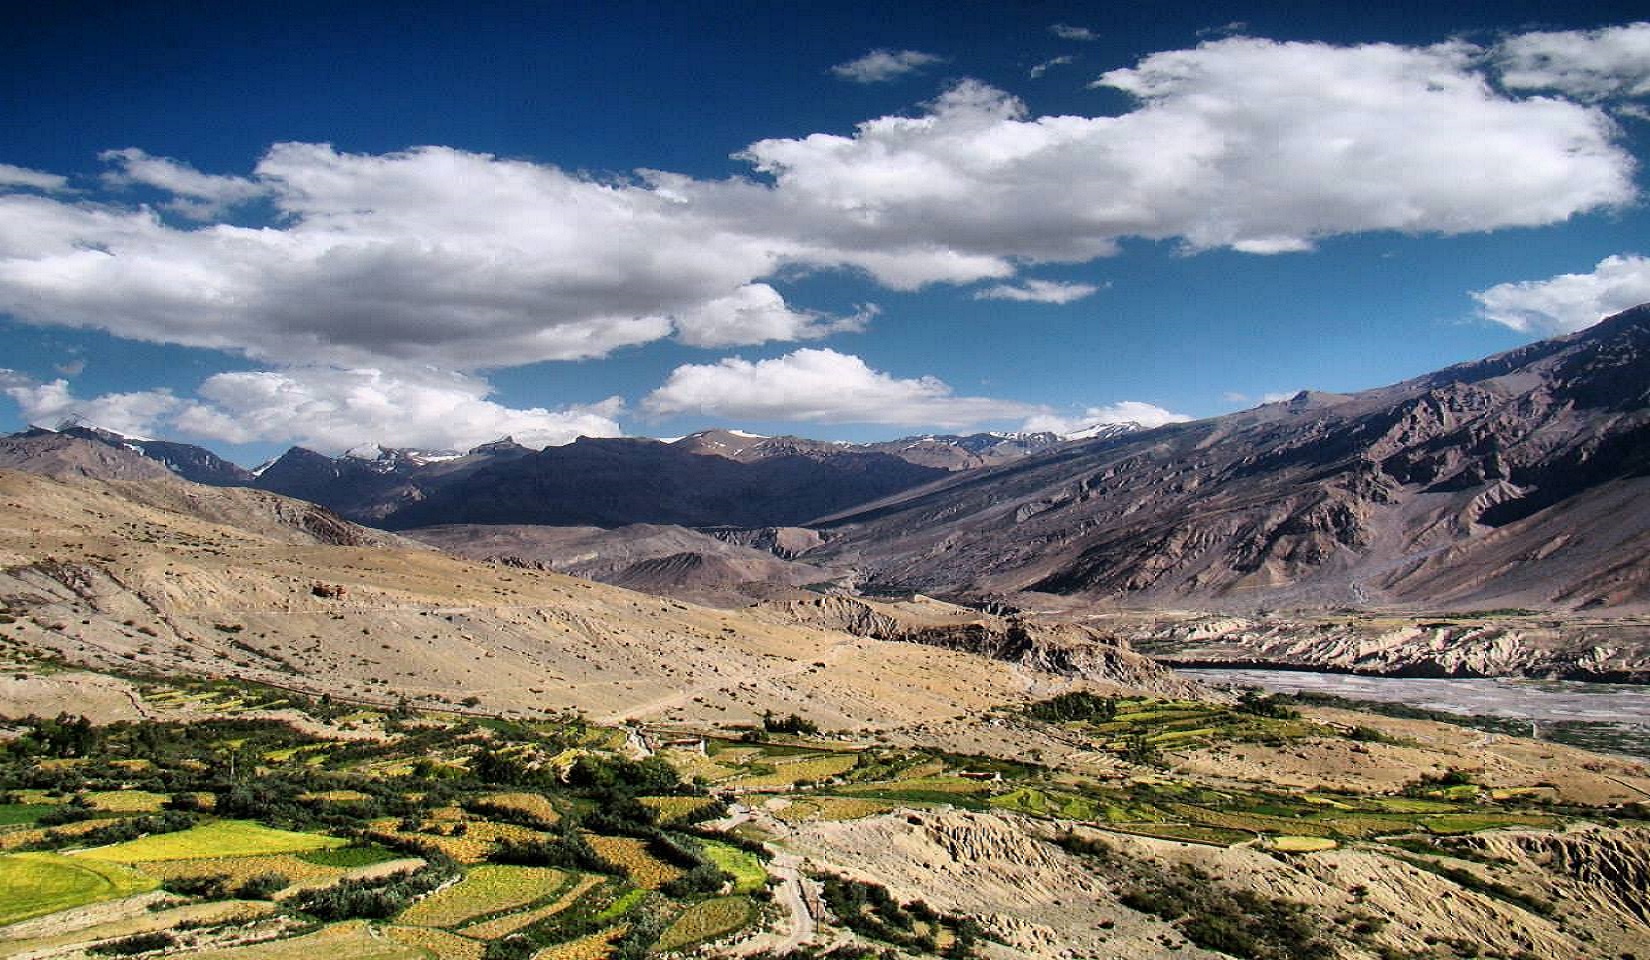 Spiti The Wonder That Is Tabo